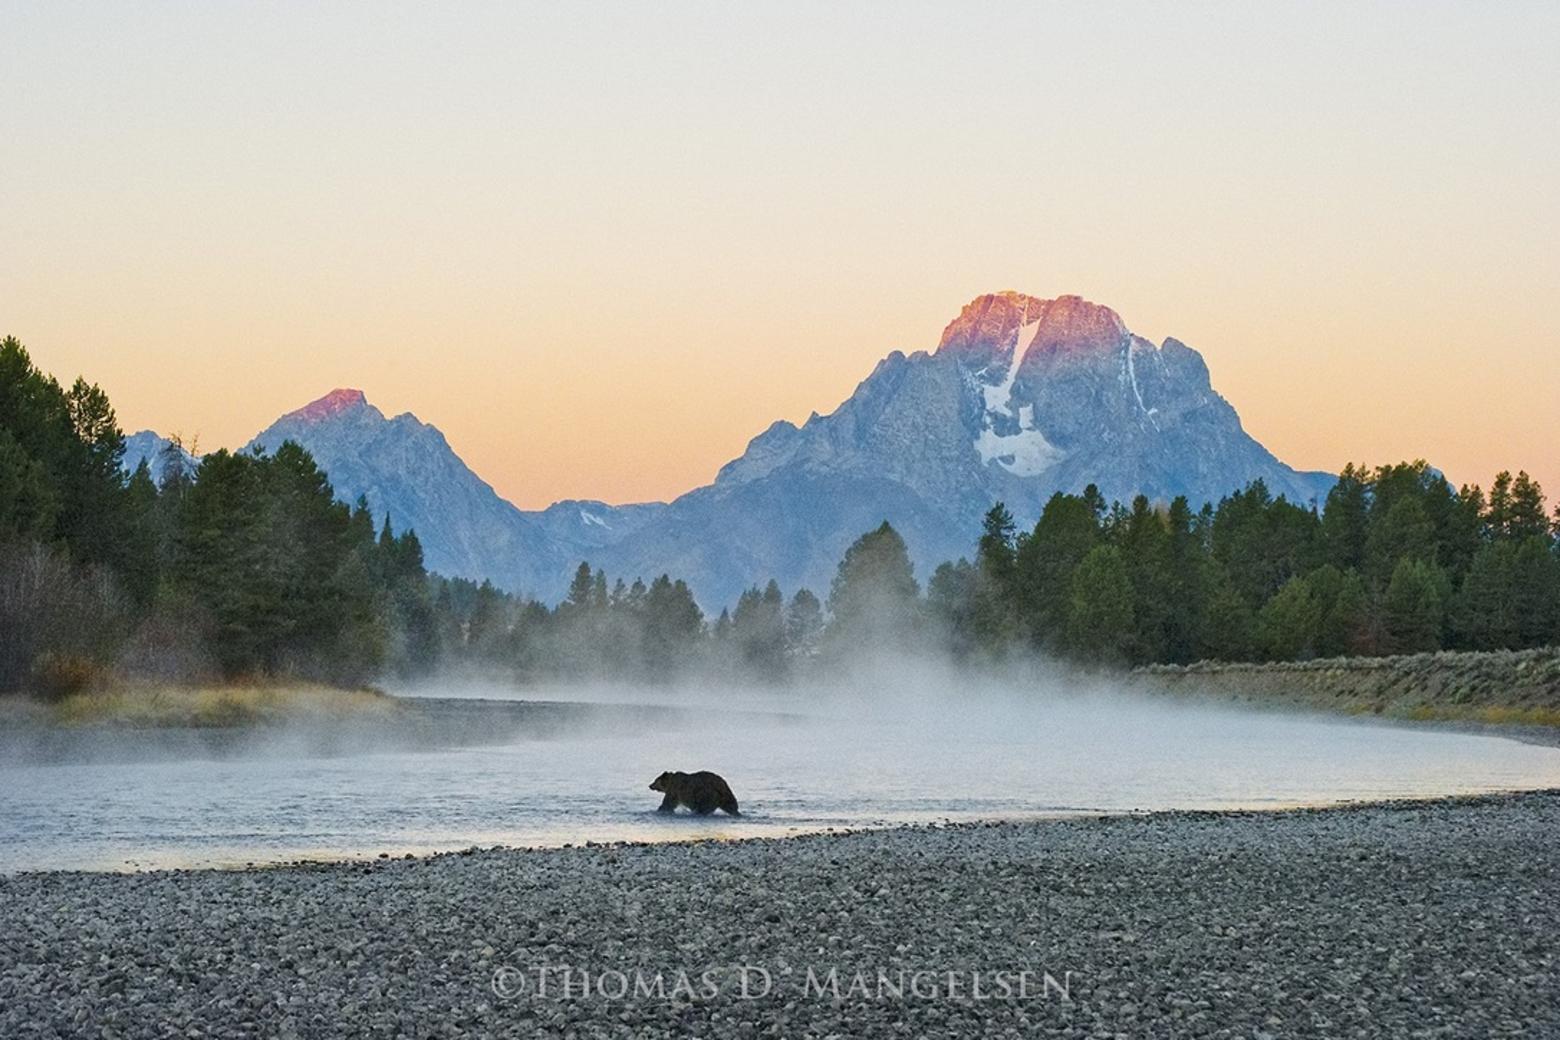 Grizzly 399 crossing the Snake River. Is a bear-watching excursion with American nature photograph Tom Mangelsen in your future?  Photo courtesy Thomas D. Mangelsen (mangelsen.com)